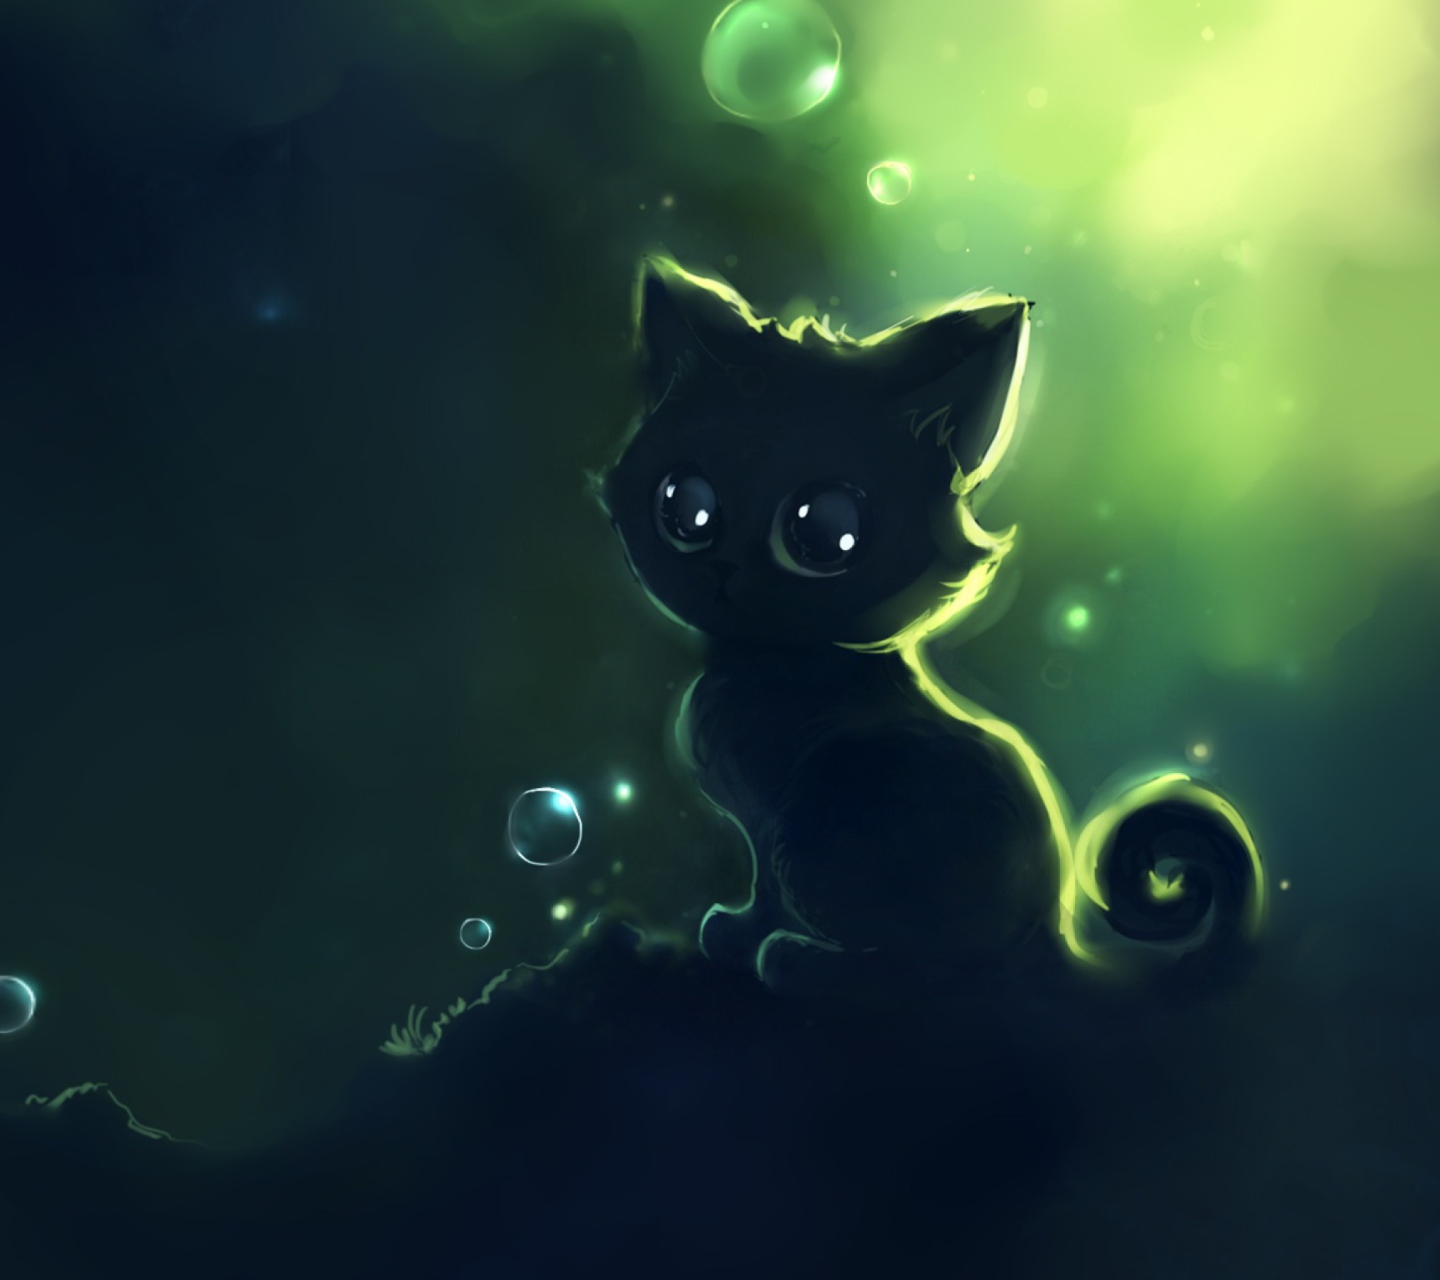 Lonely Black Kitty Painting wallpaper 1440x1280